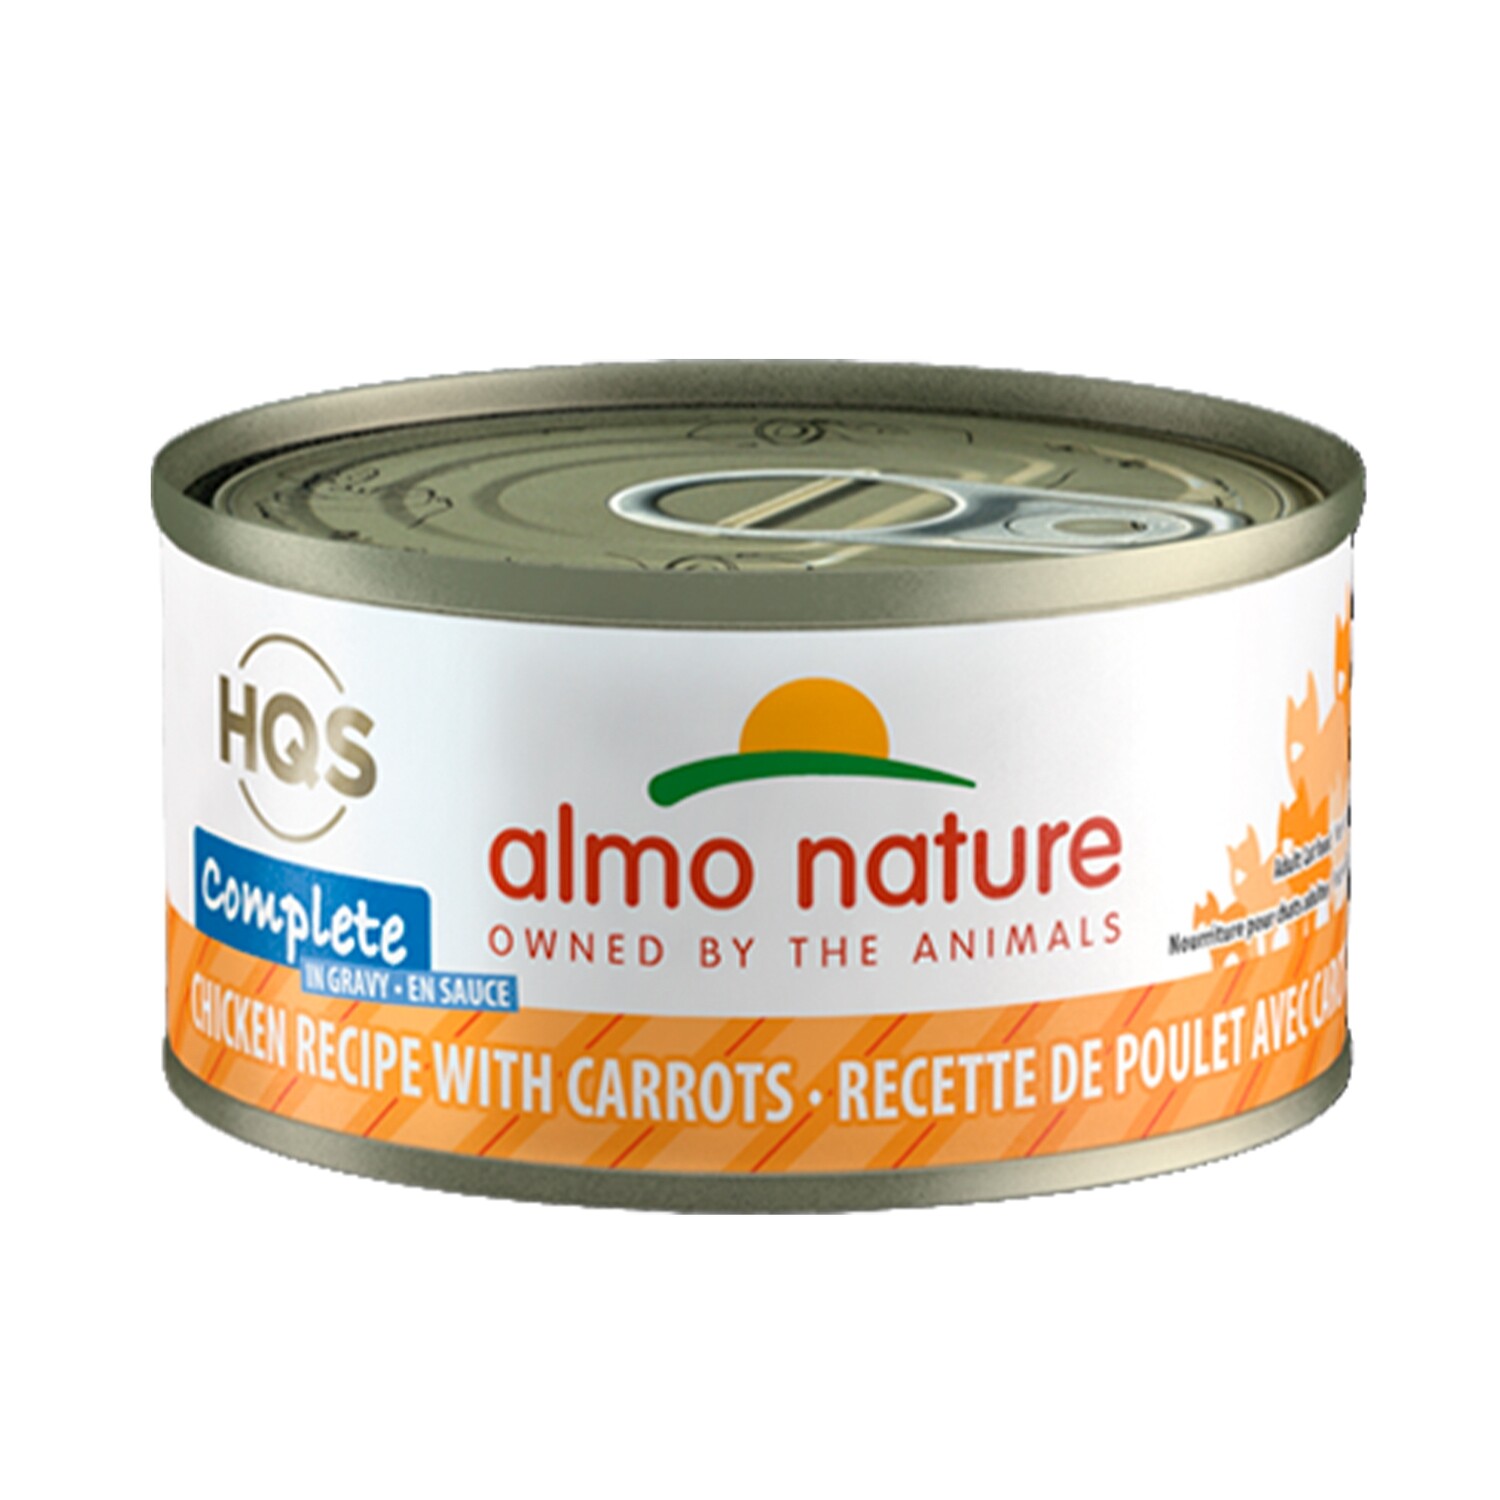 Almo Nature HQS Complete Chicken Recipe with Carrots in Gravy Canned Cat Food-70g/2.5oz - 鸡肉胡萝卜猫罐头